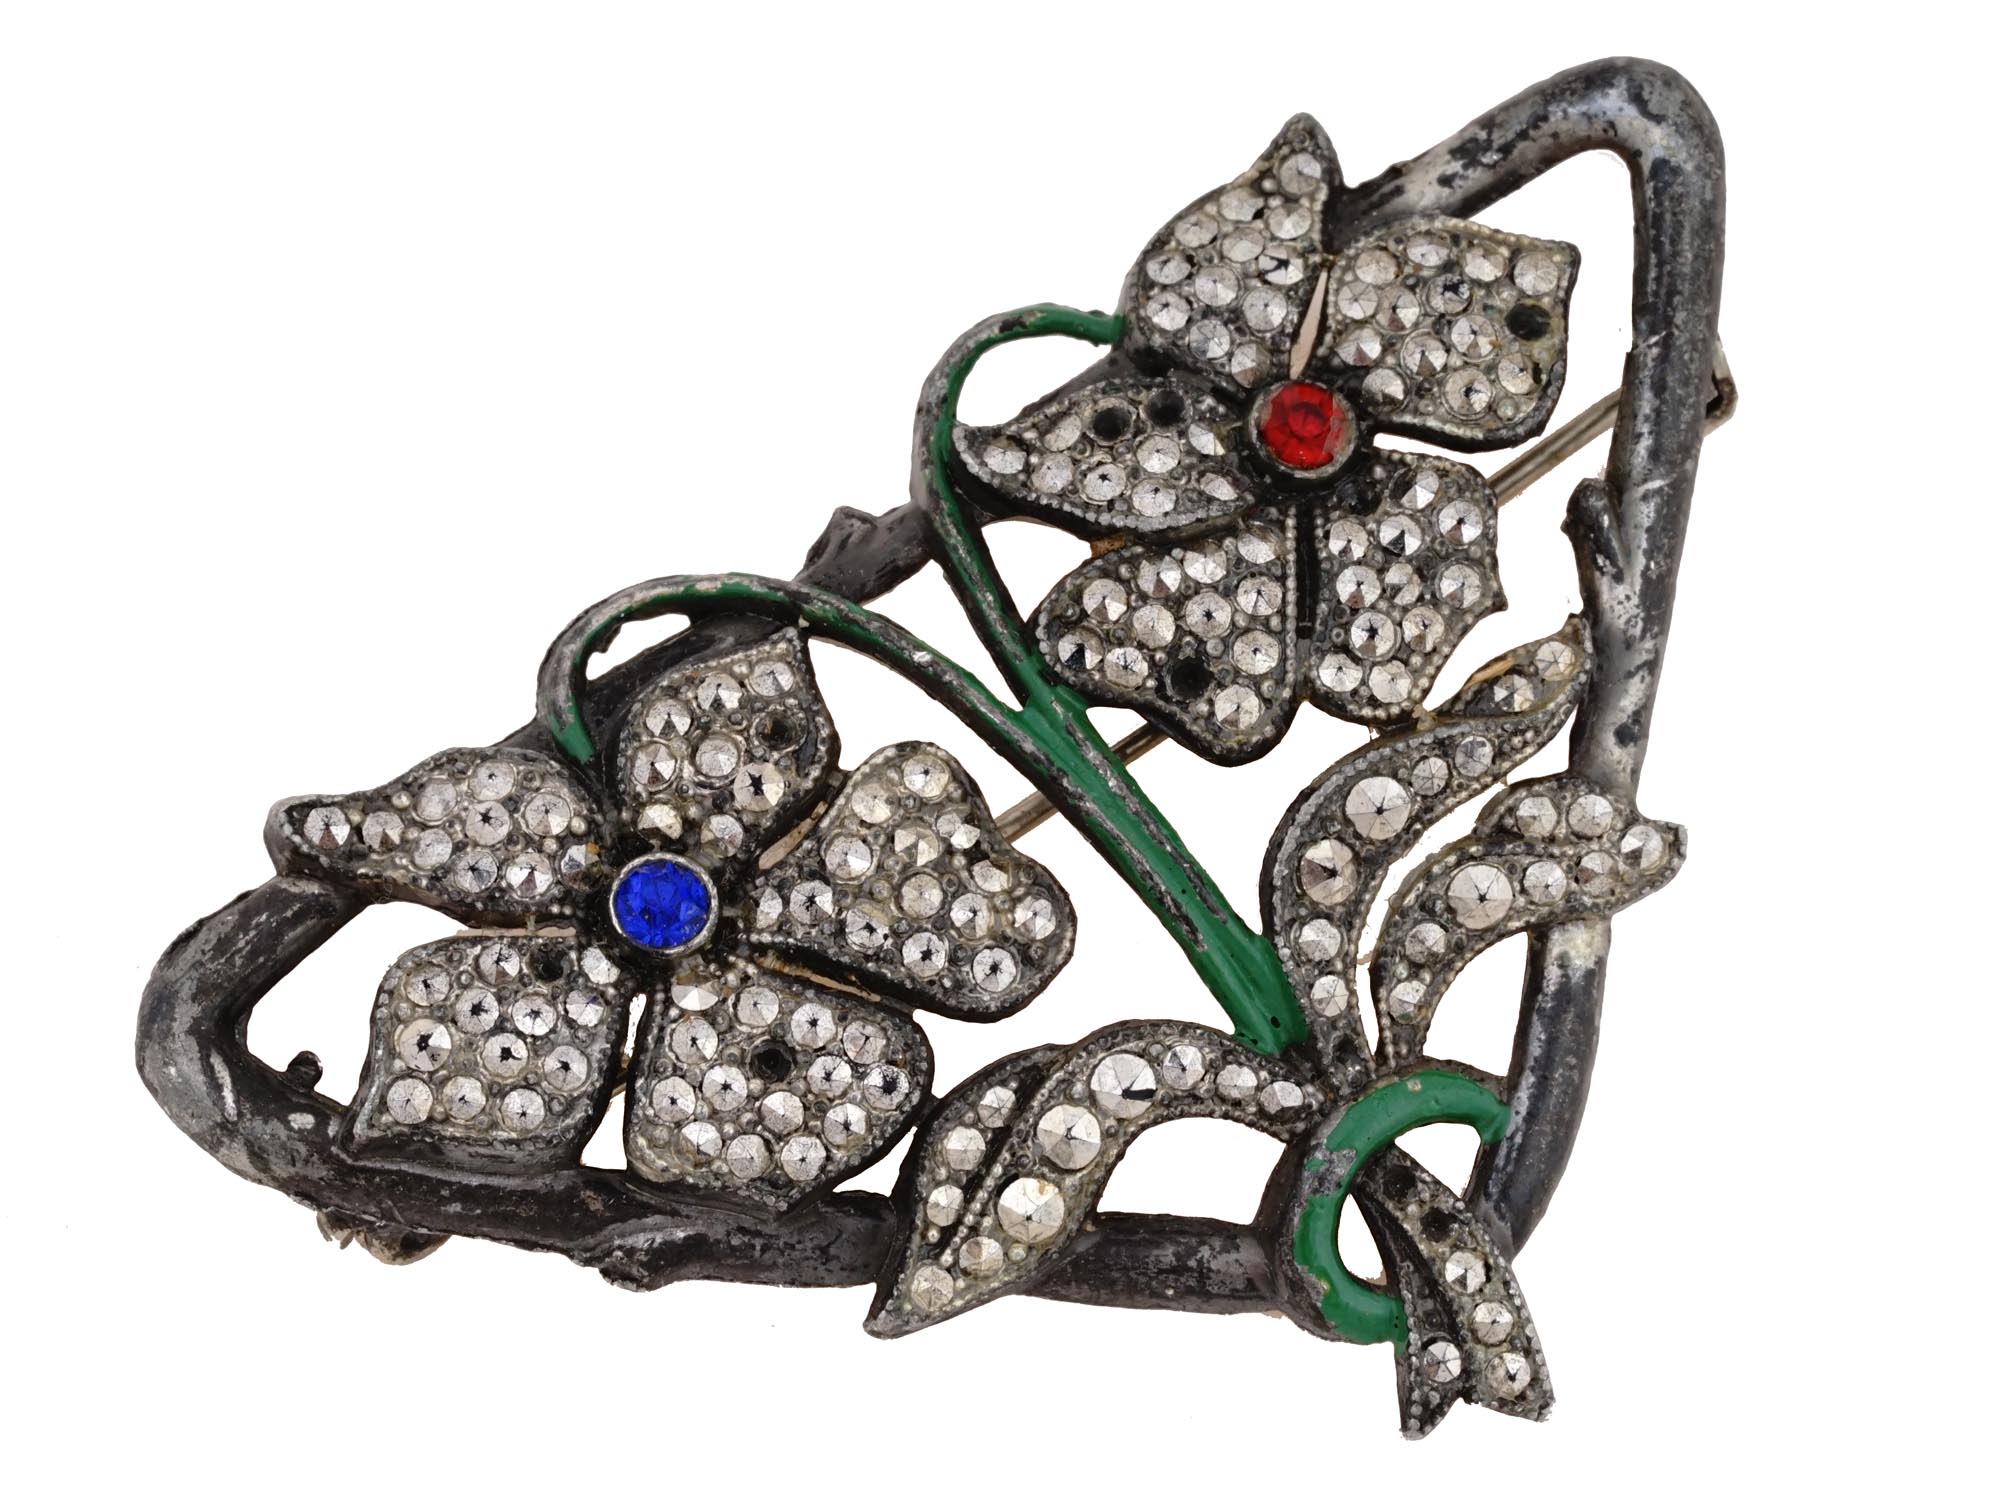 ART DECO AMERICAN STERLING SILVER JEWELRY BROOCH PIC-0